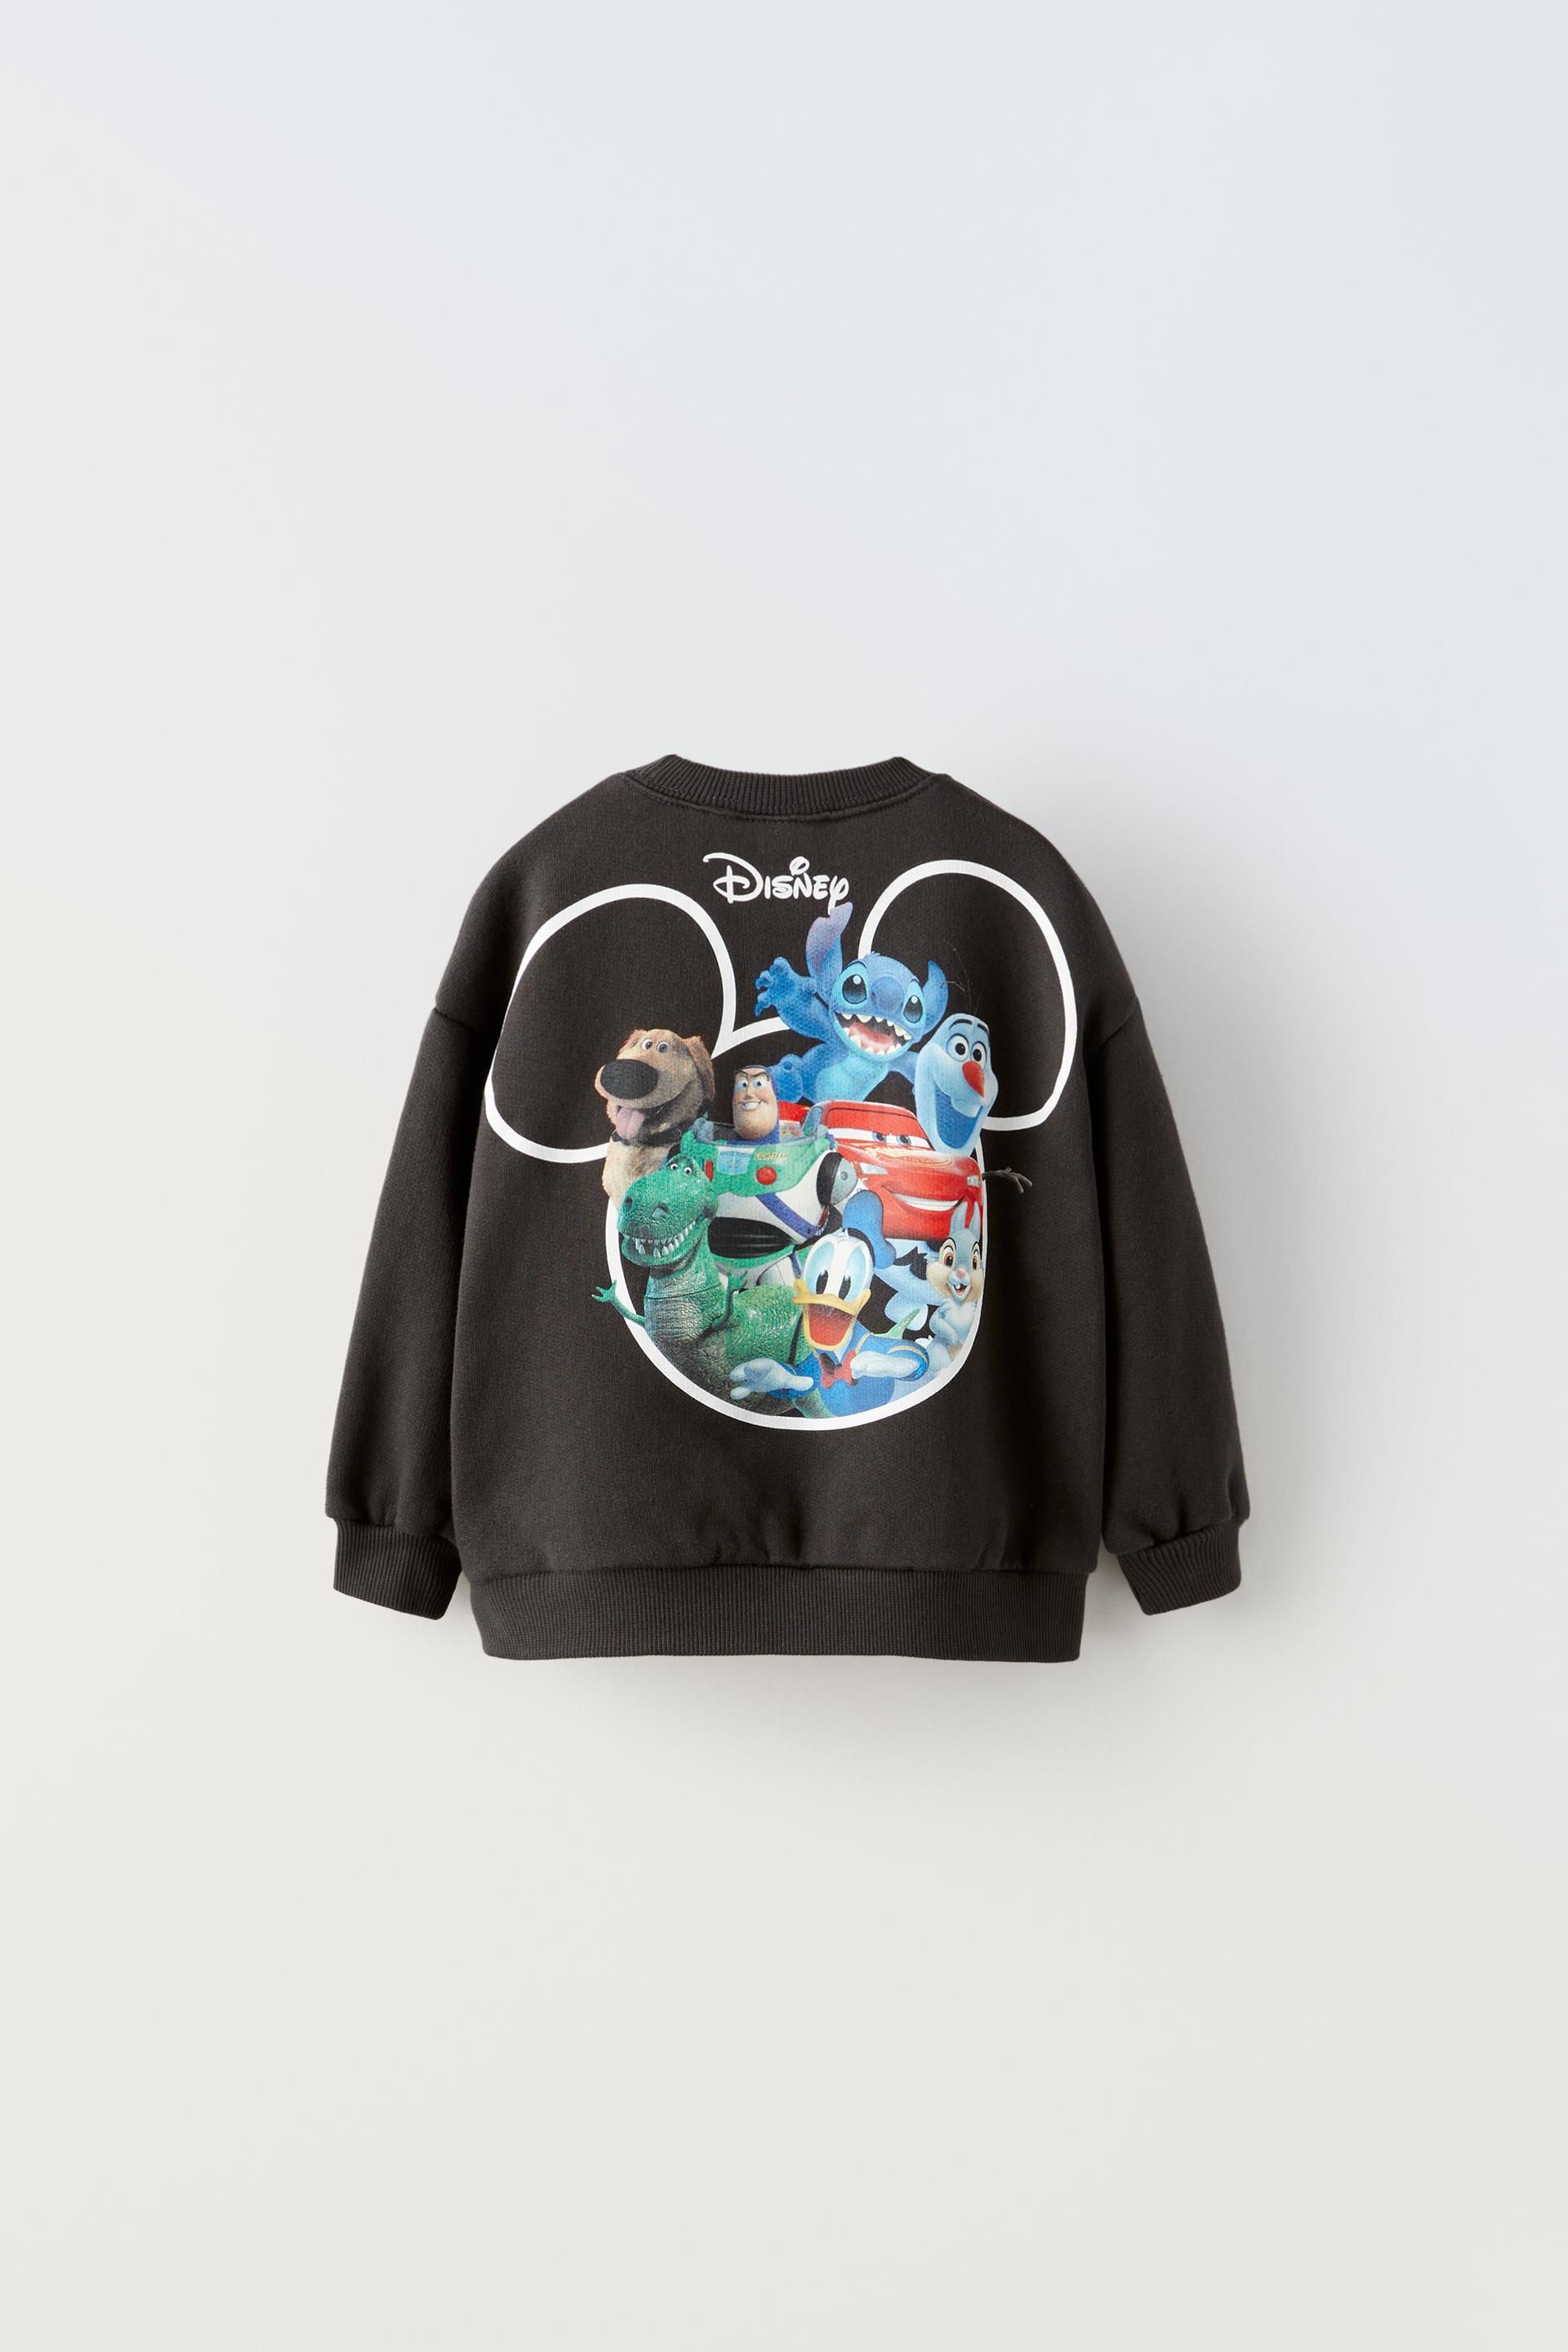 MICKEY MOUSE AND FRIENDS © DISNEY 100TH ANNIVERSARY SWEATSHIRT - Black